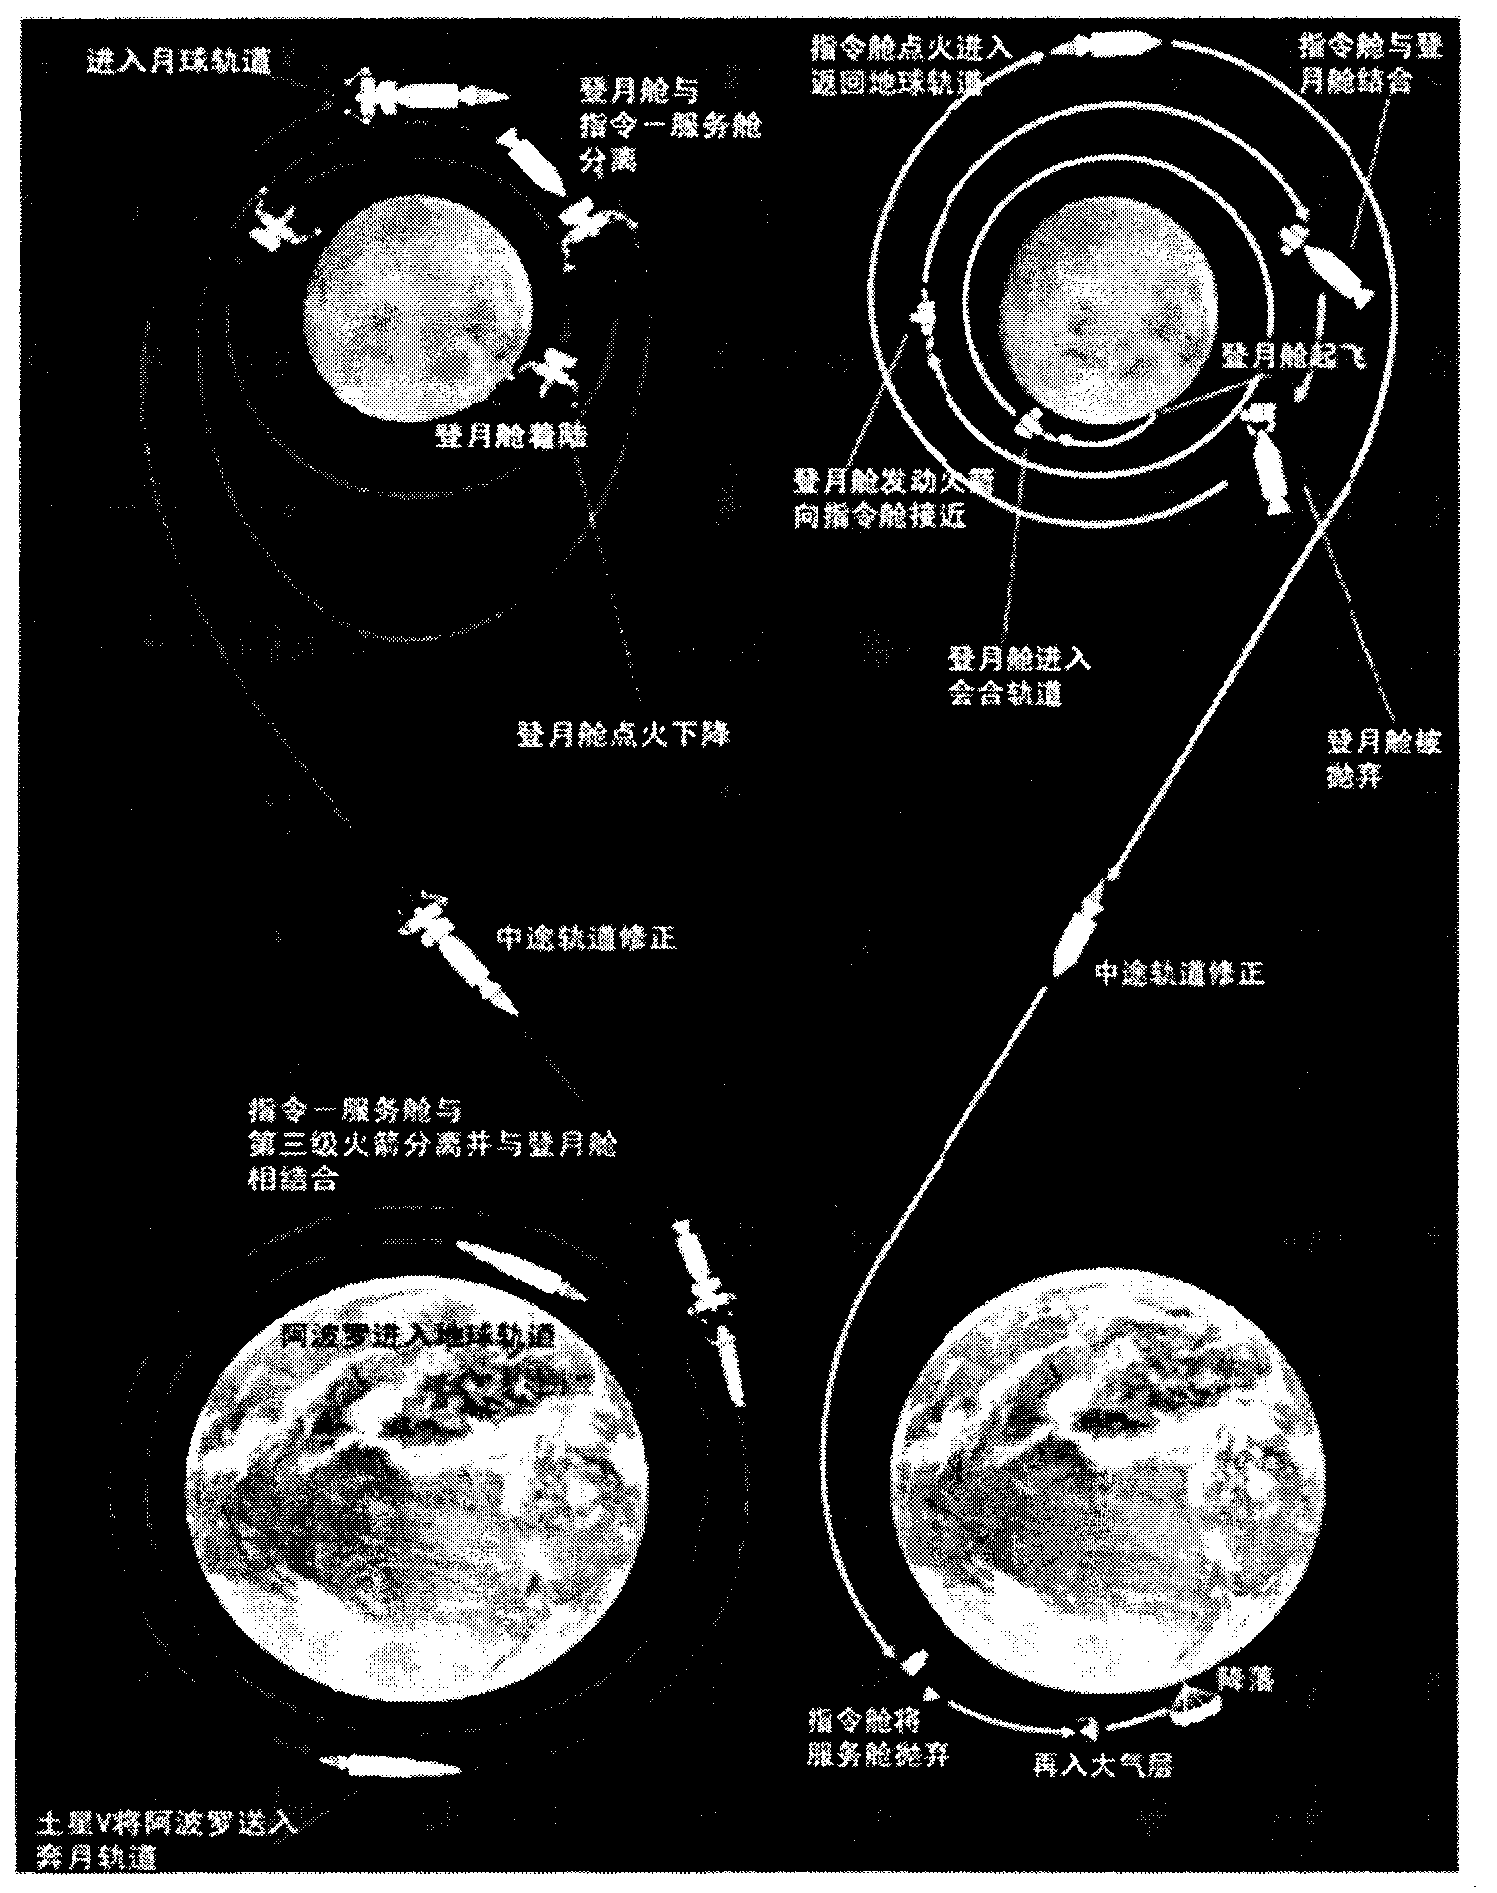 Manned space and lunar exploration spacecraft system based on lunar cycle revisiting orbit and exploration method